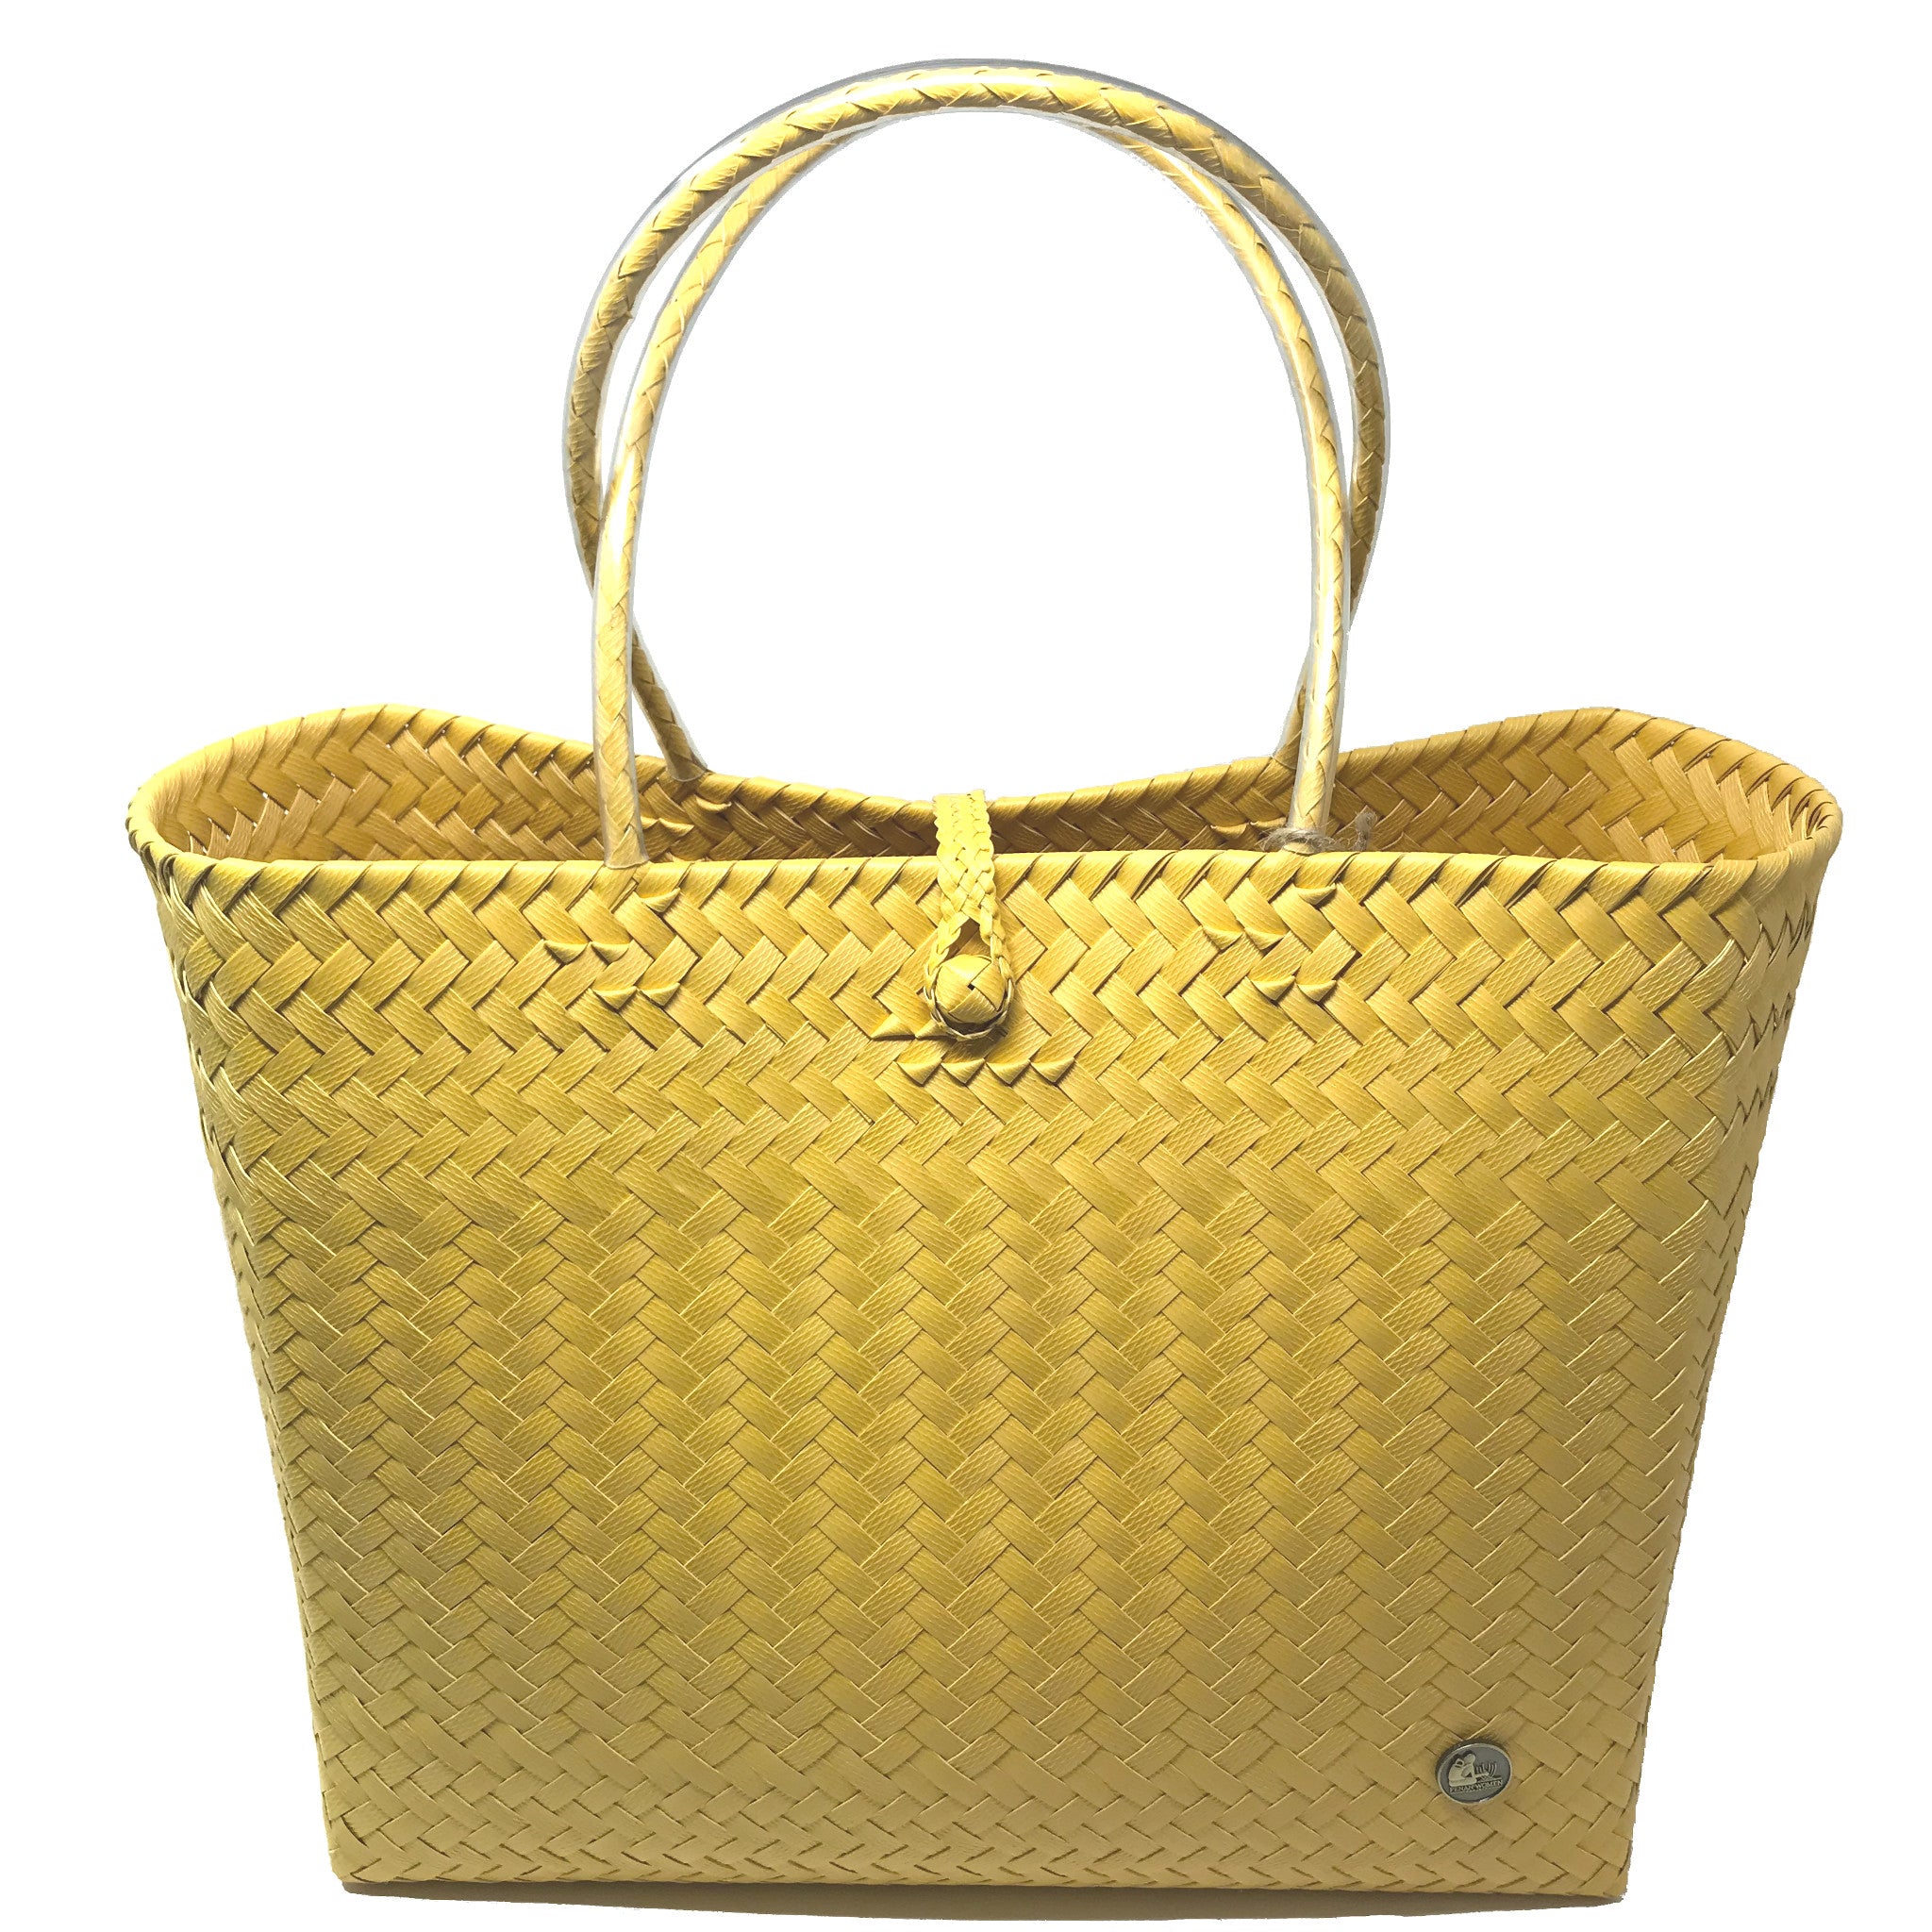 Yellow large size tote bag facing the front.